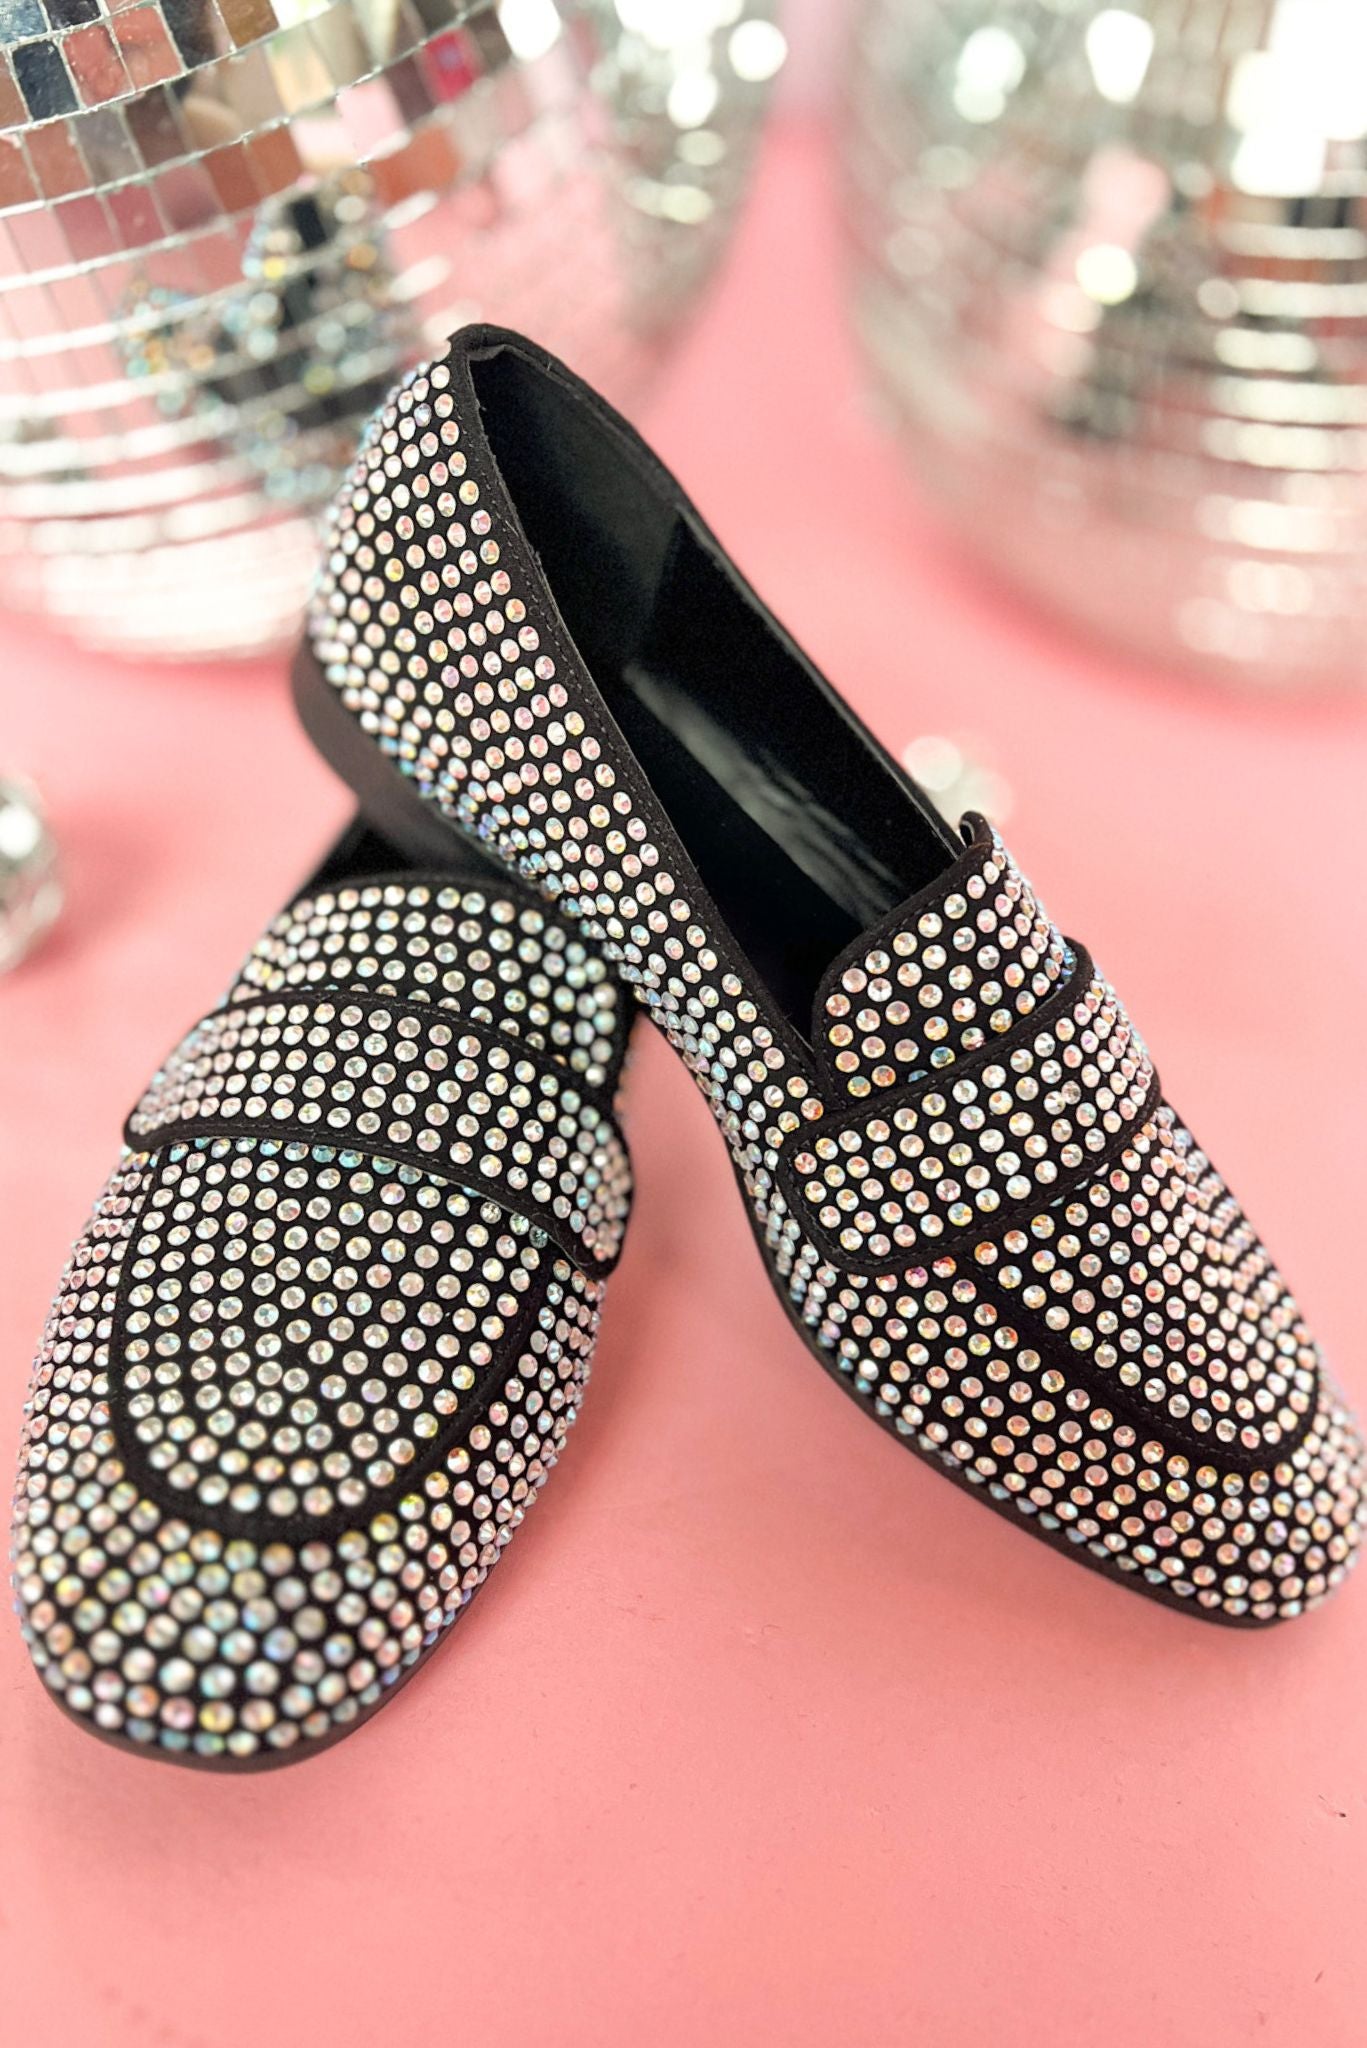  Black Rhinestone Loafers, must have shoes, must have style, fall shoes, rhinestone shoes, elevated shoes, mom style, shop style your senses by mallory fitzsimmons